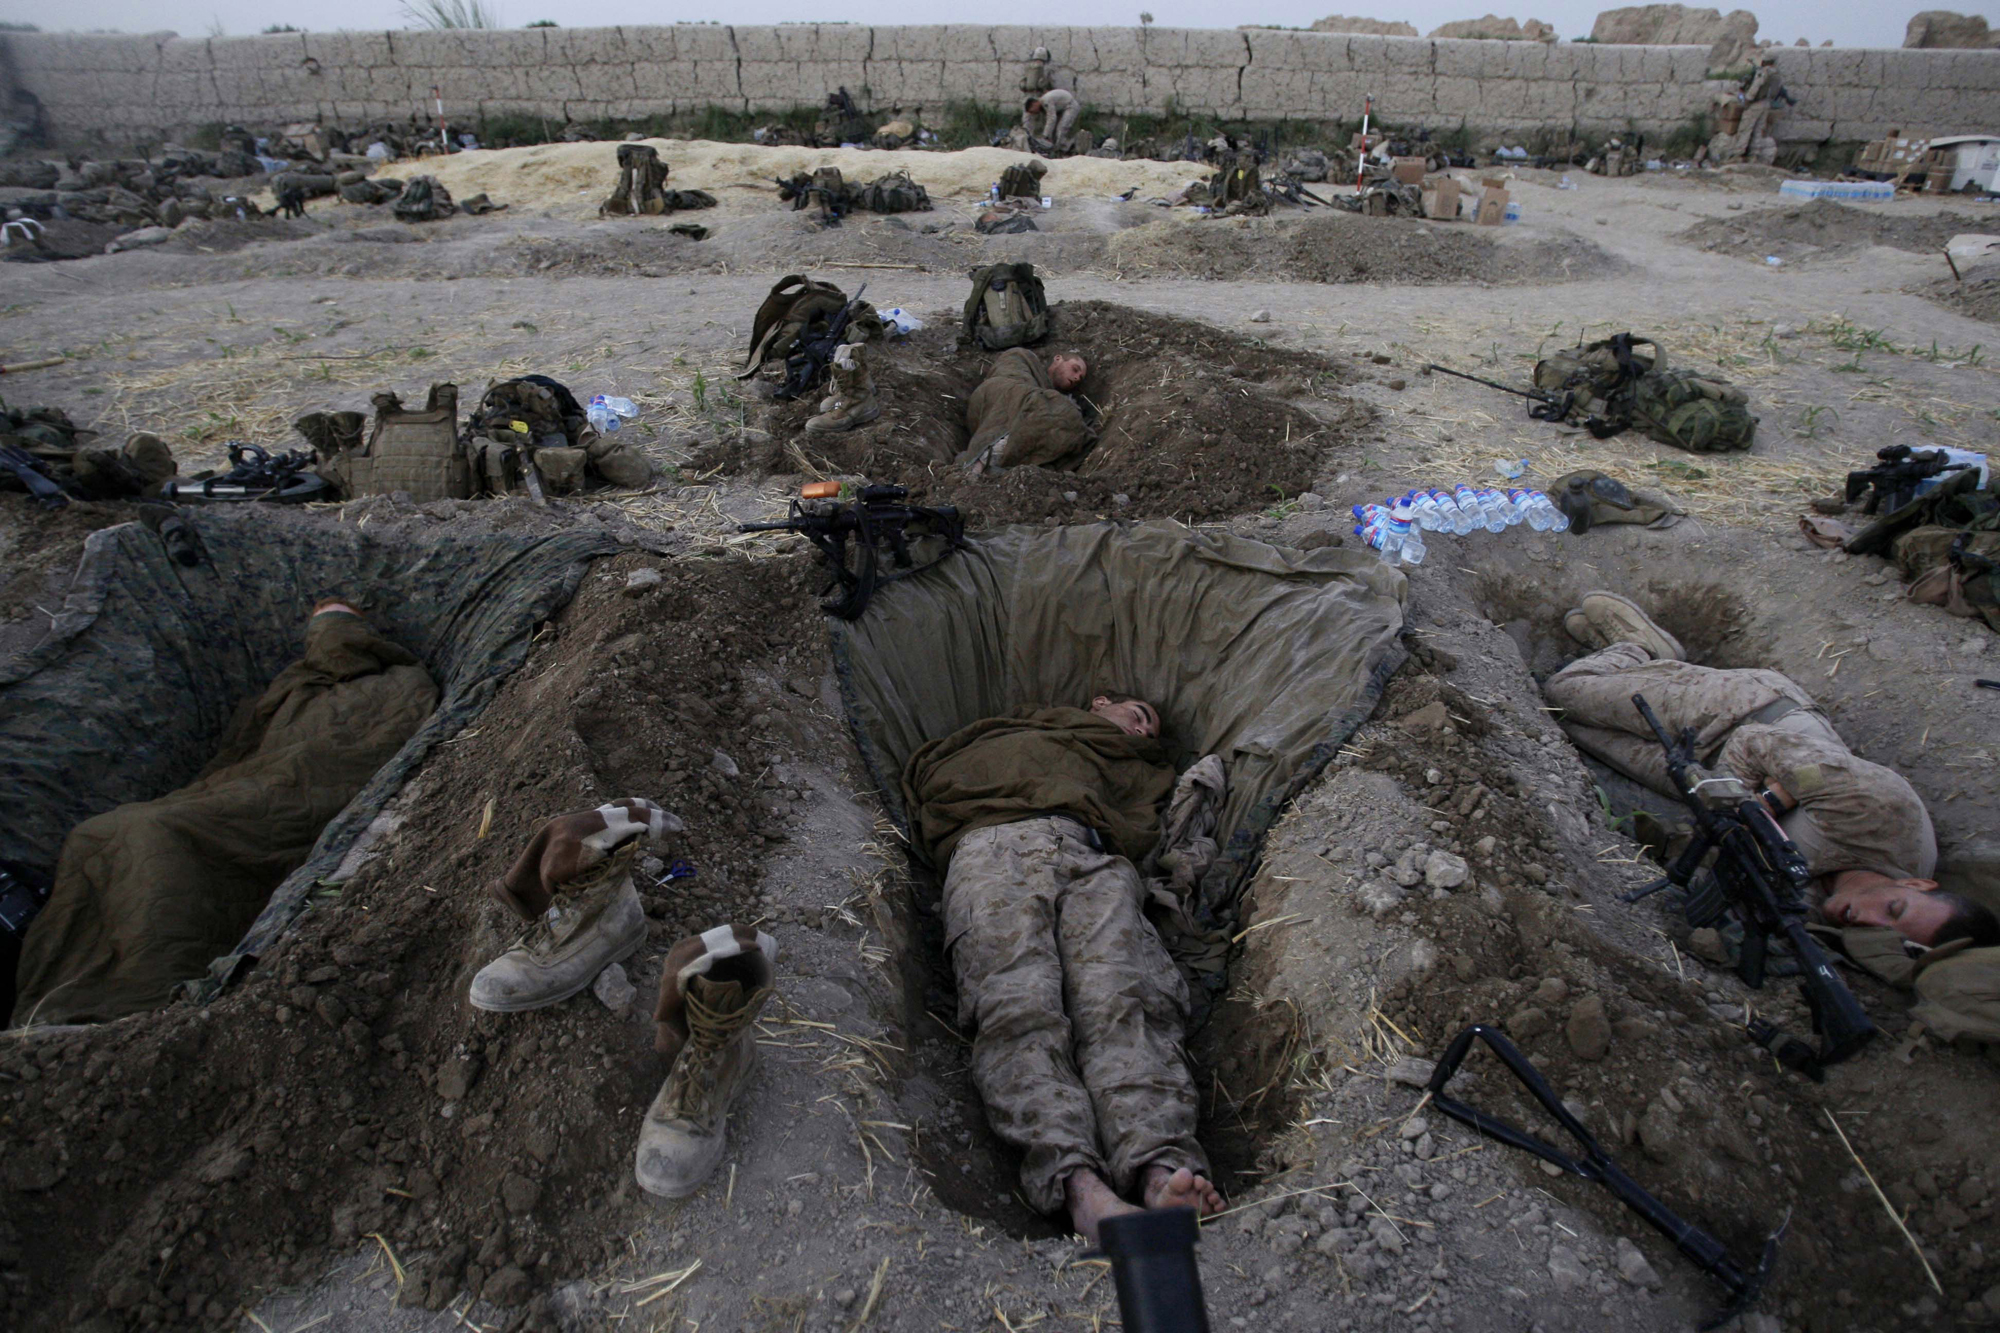 U.S. Marines from the 2nd MEB, 1st Battalion 5th Marines sleep in their fighting holes inside a compound where they stayed for the night, in the Nawa district of Afghanistan's Helmand province,  July 8, 2009.